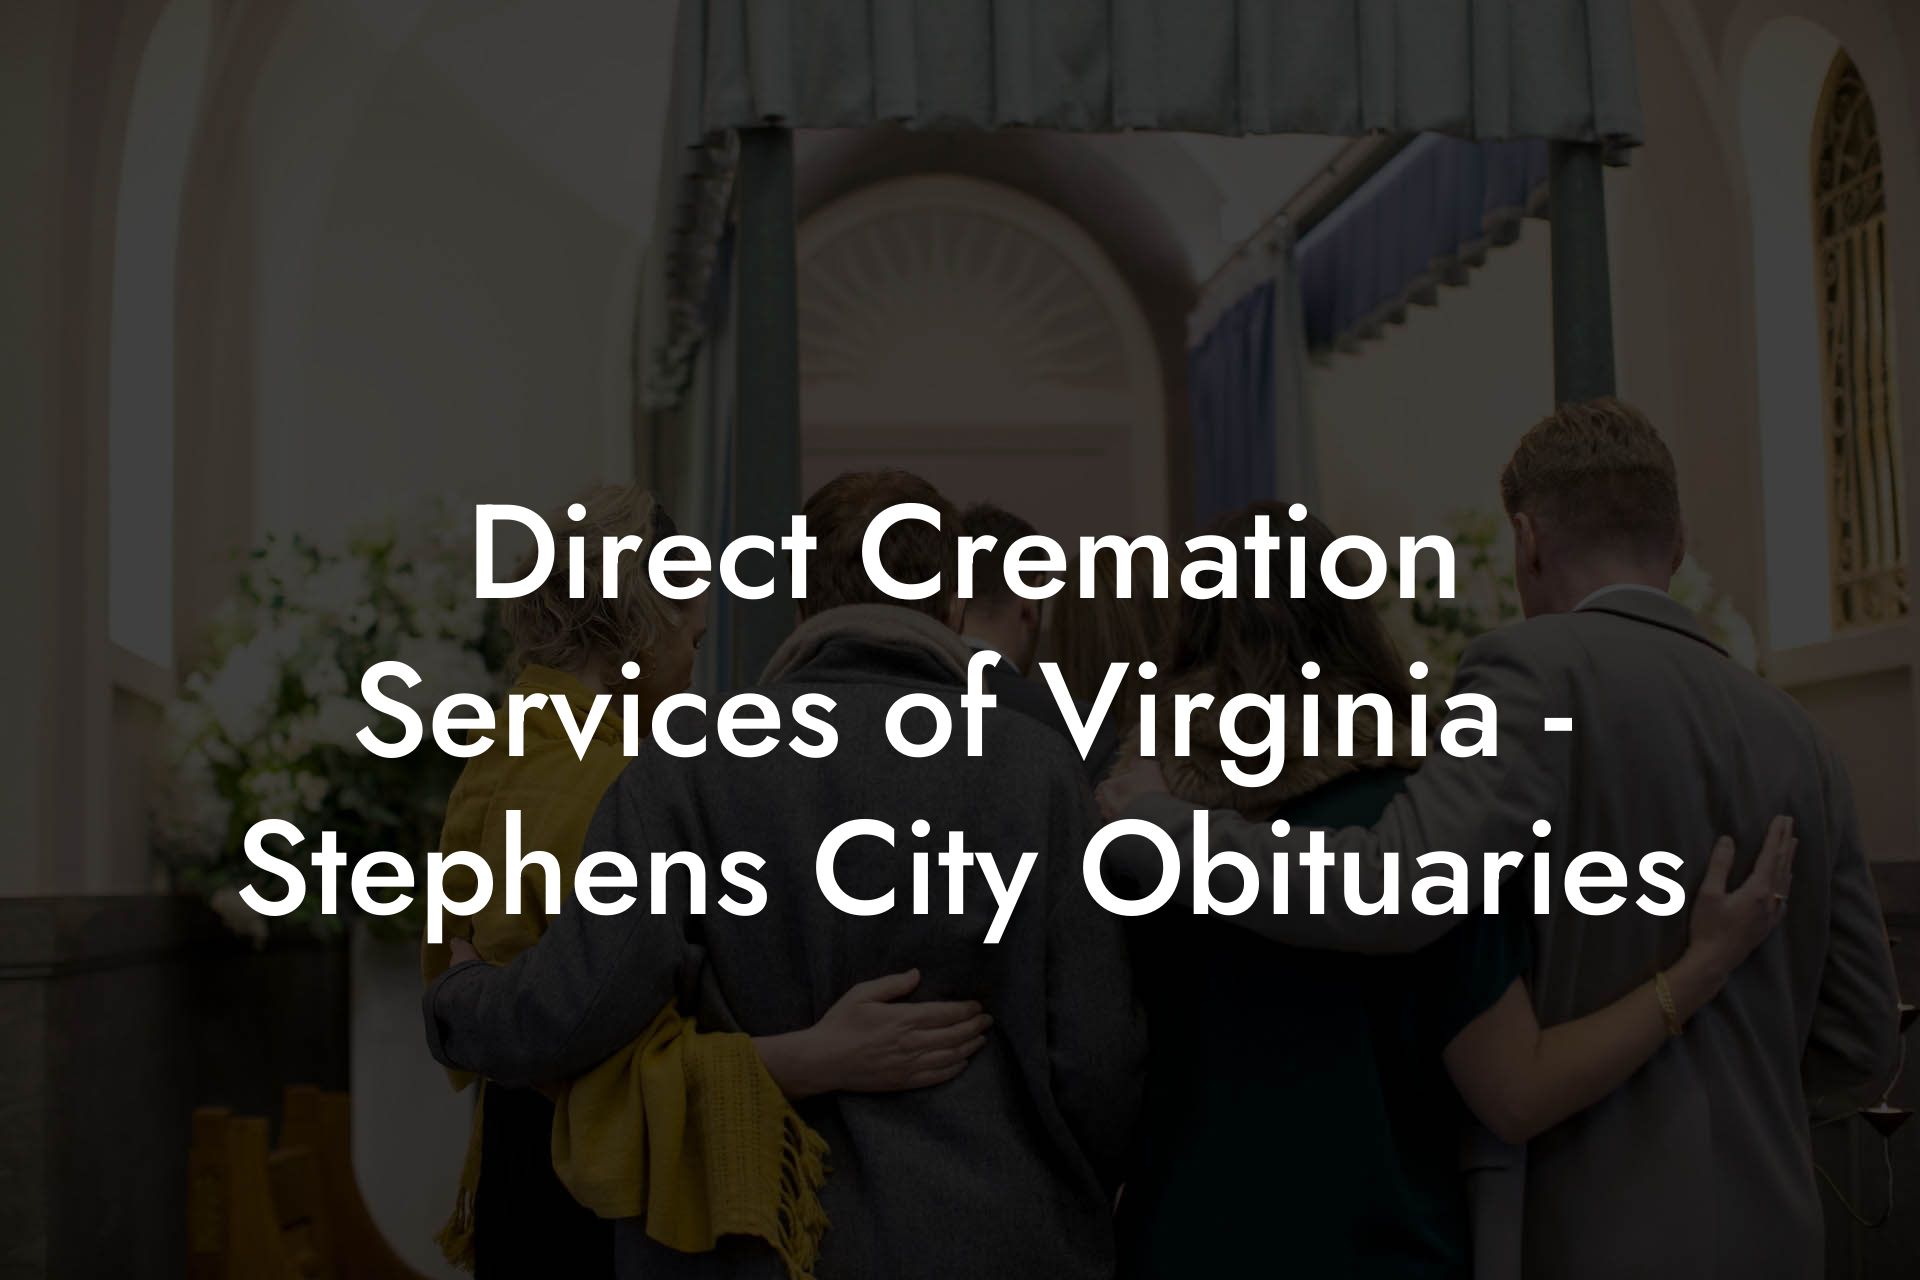 Direct Cremation Services of Virginia - Stephens City Obituaries